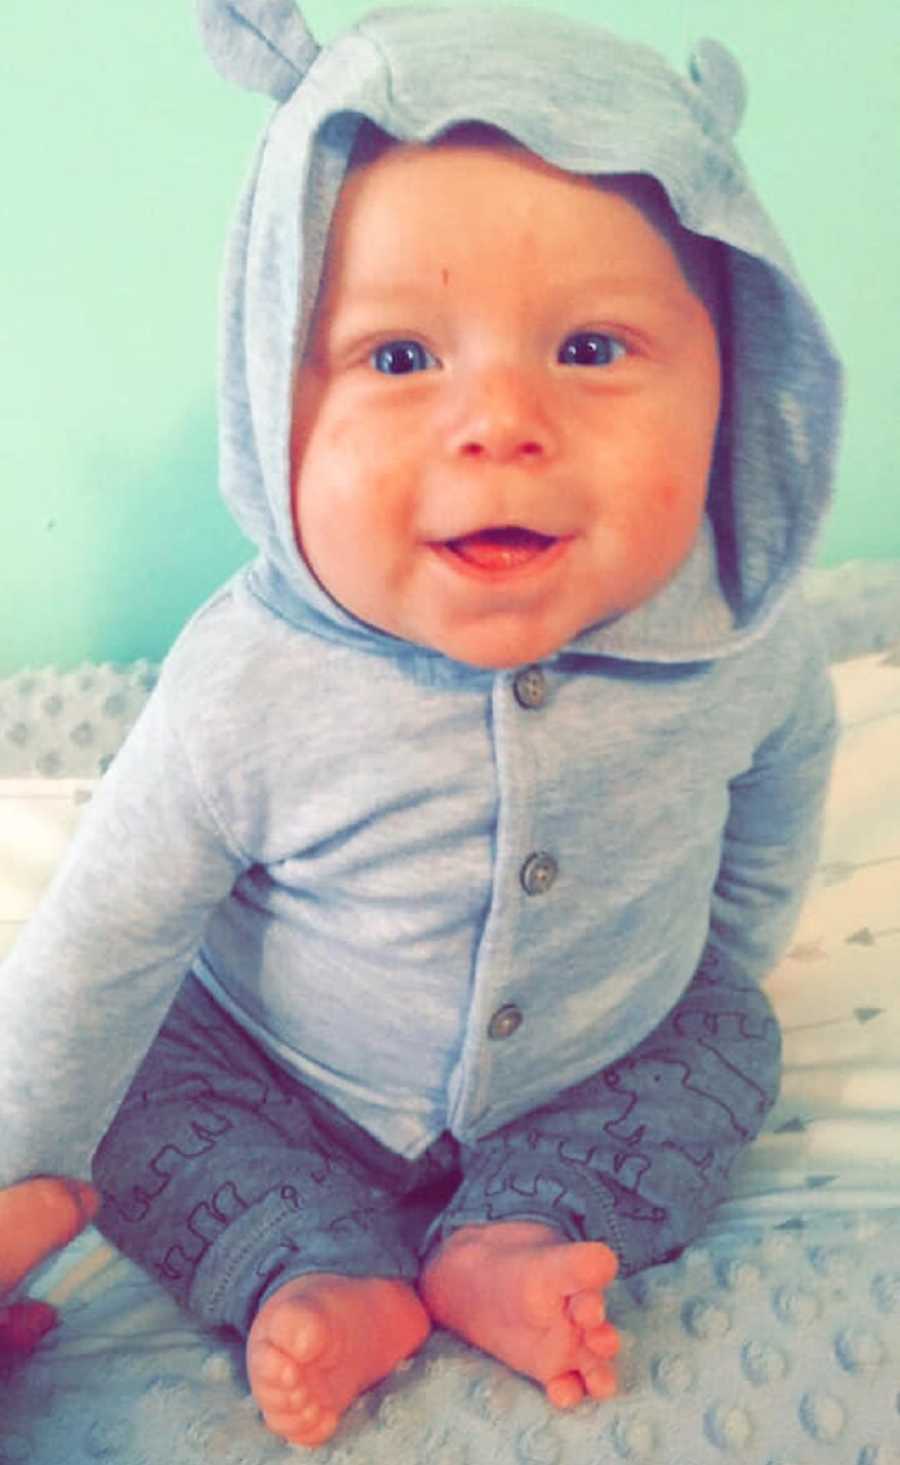 Baby with neuroblastoma smiles as he sits up wearing gray sweater that has hood with ears on it